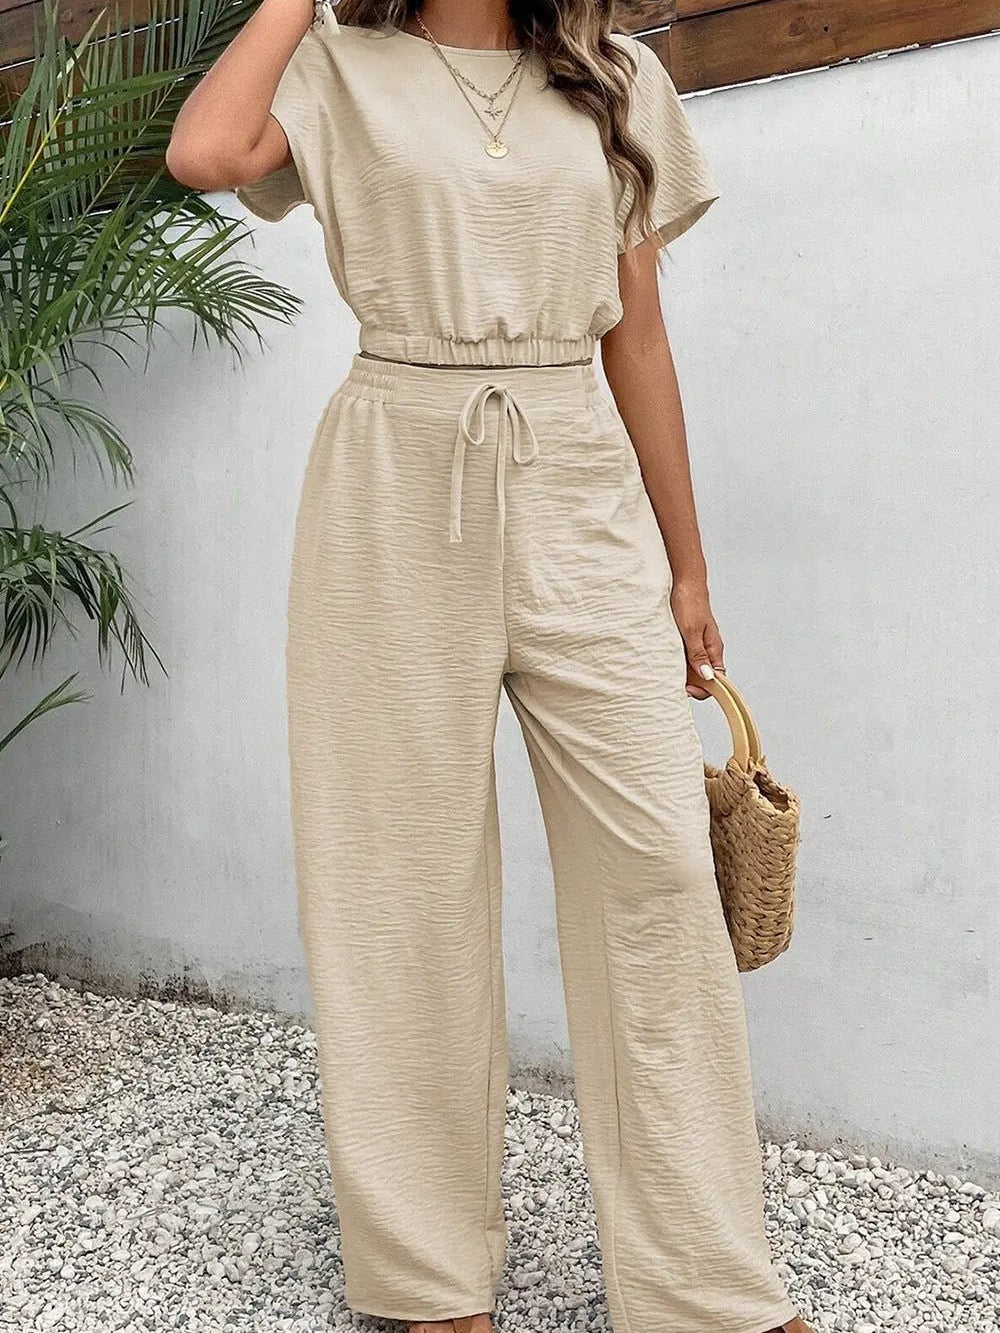 SHORT SLEEVE TWO-PIECE SUMMER OUTFIT - MeadeuxSHORT SLEEVE TWO-PIECE SUMMER OUTFITTwo Piece SetMeadeux